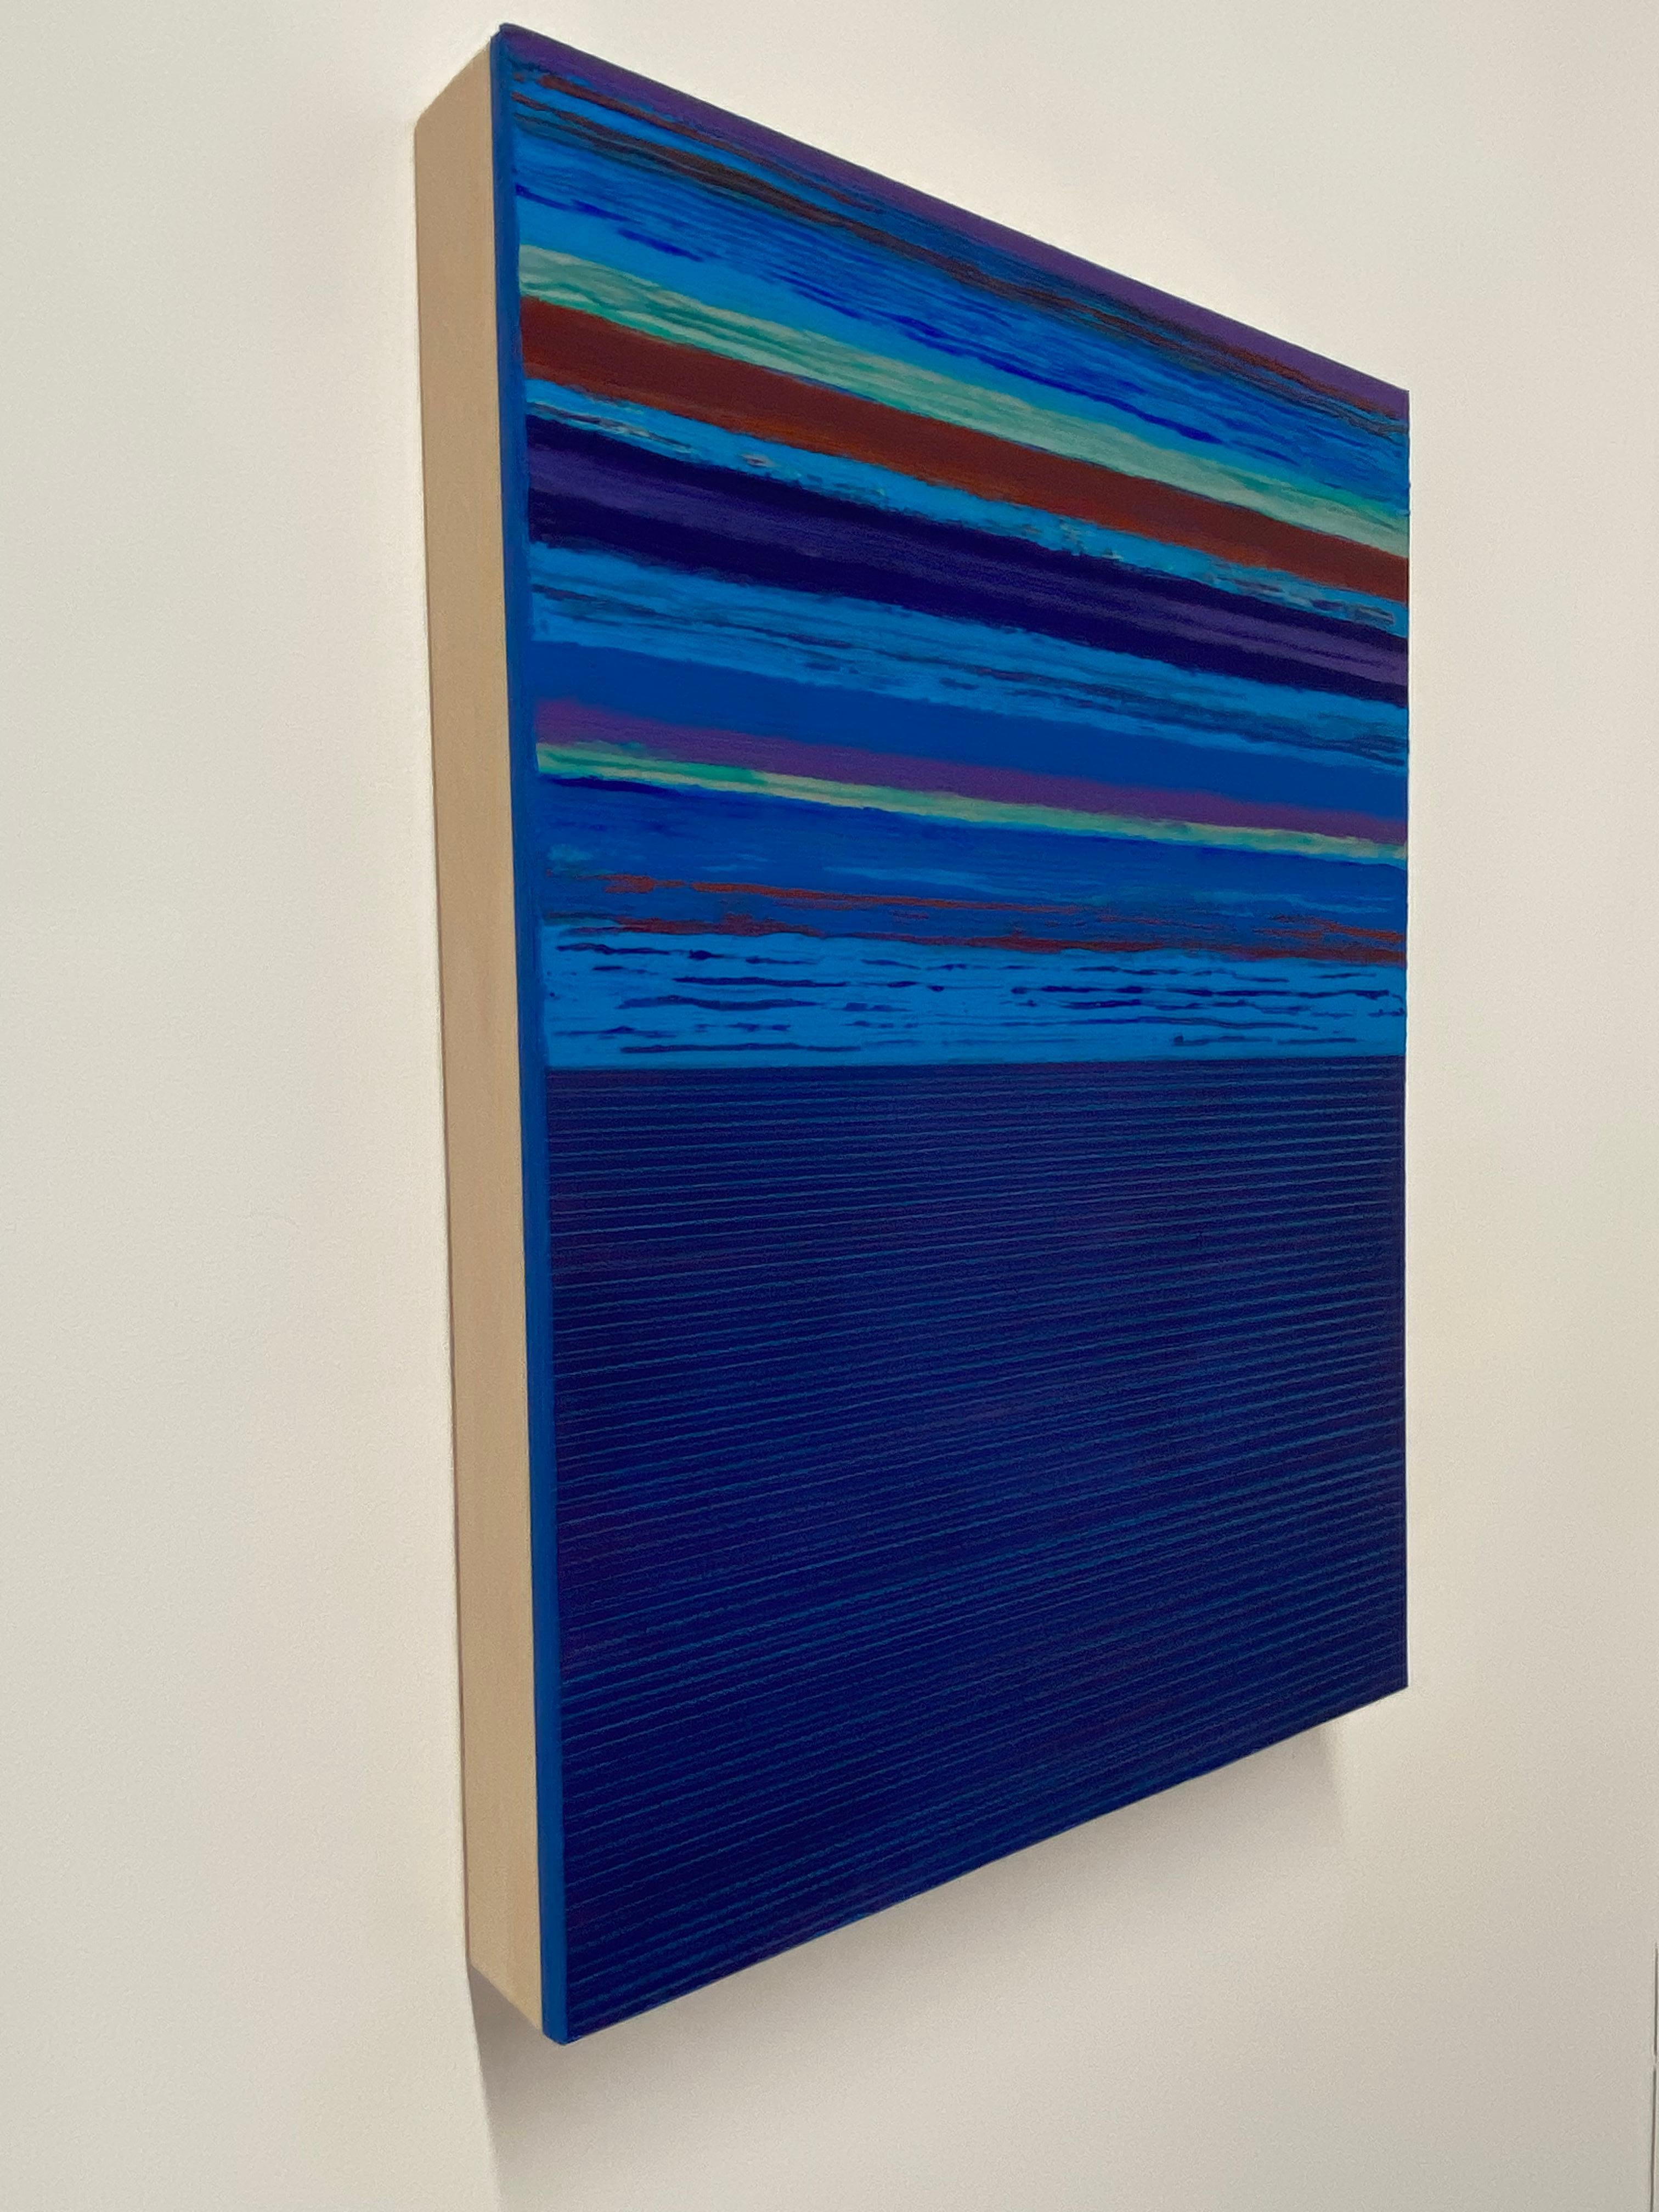 Mint green and burgundy red stripes are bright and colorful against a luminous cobalt blue background. Signed, dated and titled on verso.

Joanne Mattera’s paintings can be described as lush minimalism, the work is chromatically rich and